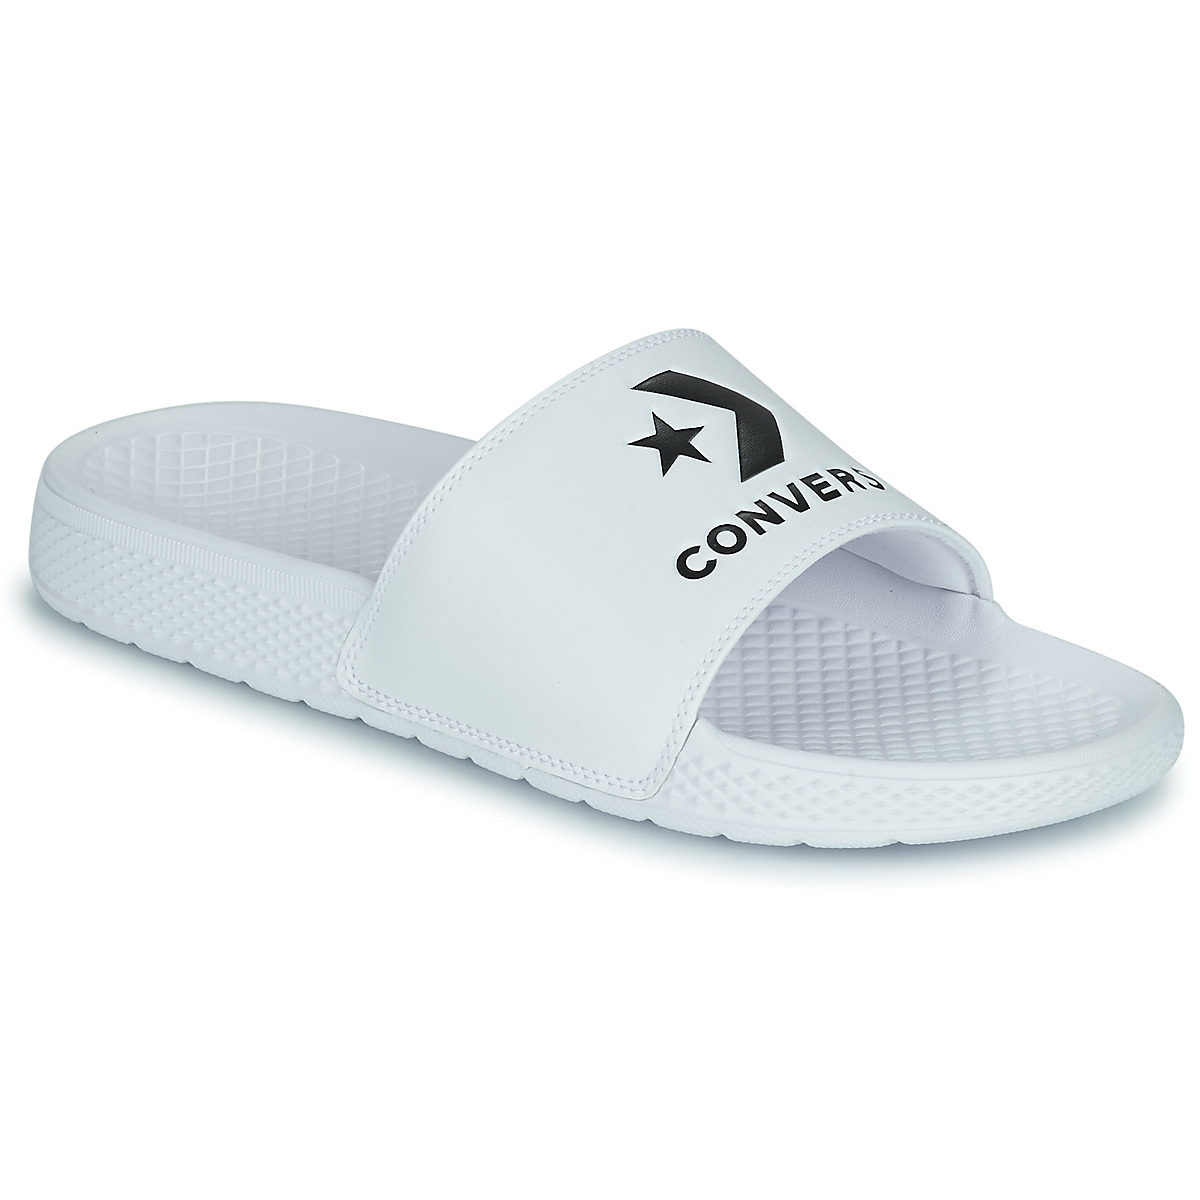 Converse Chuck Taylor All Star Slide Foundation badslippers wit